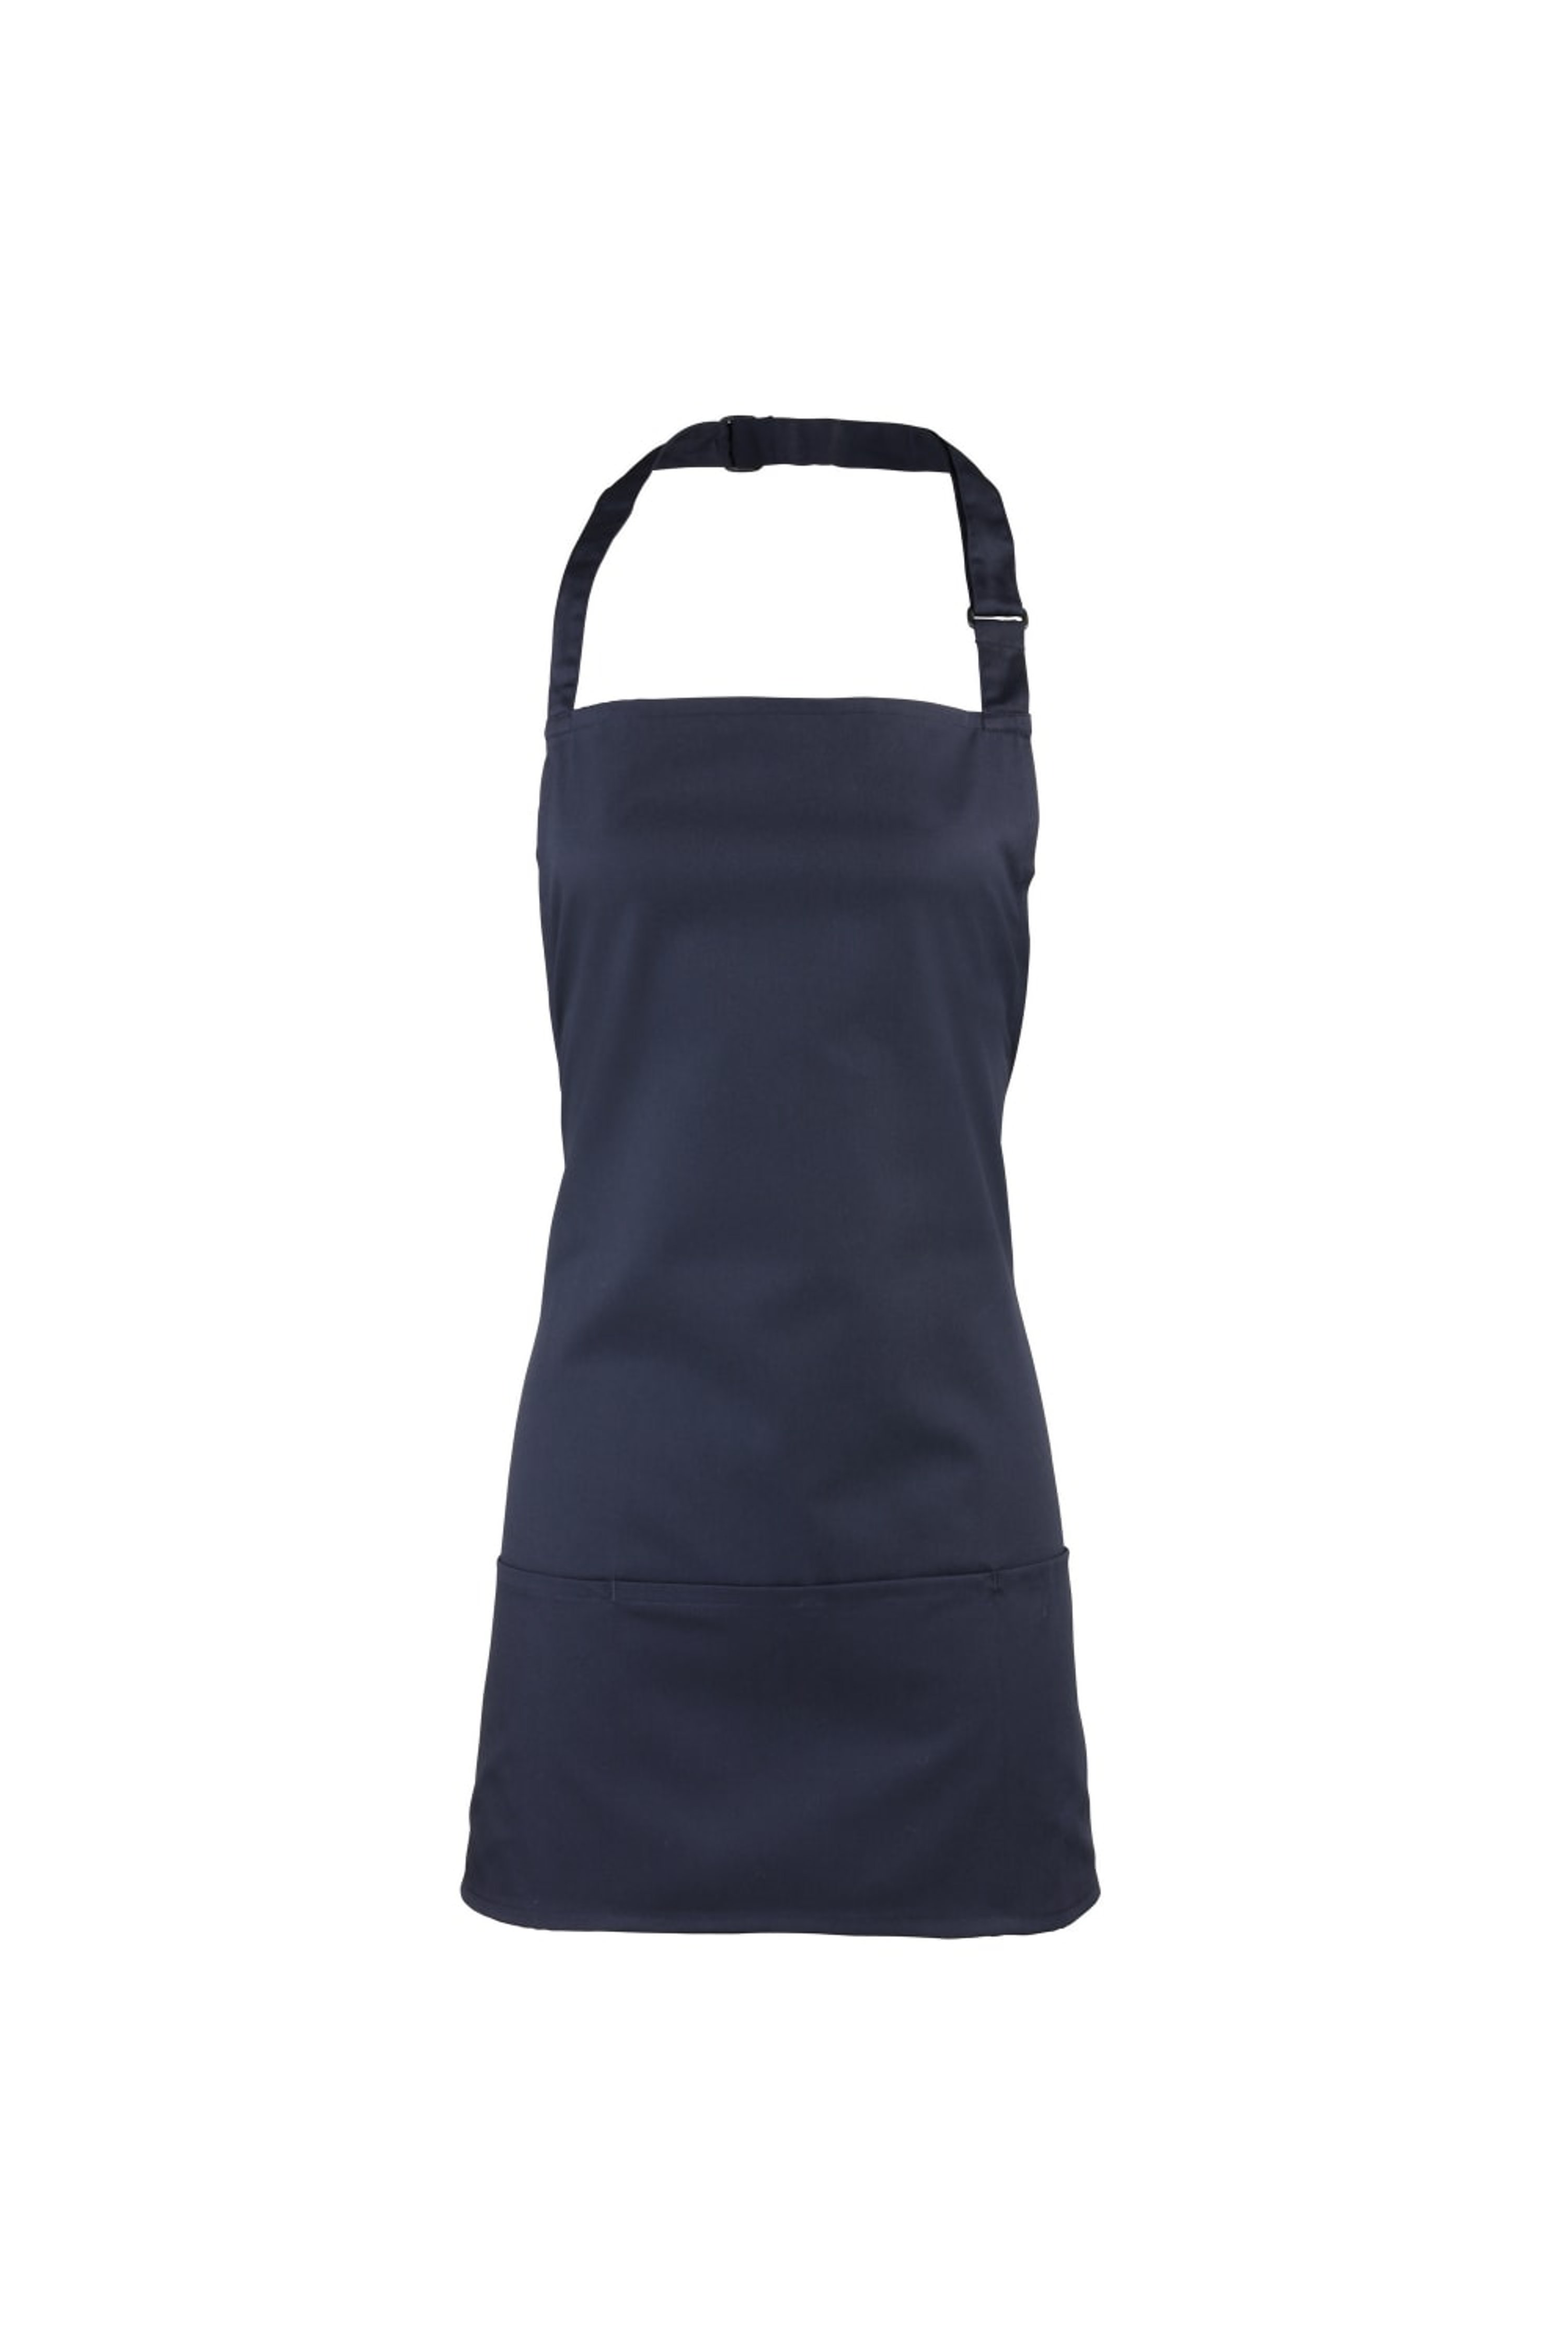 PREMIER PREMIER PREMIER COLOURS 2-IN-1 APRON / WORKWEAR (PACK OF 2) (NAVY) (ONE SIZE)